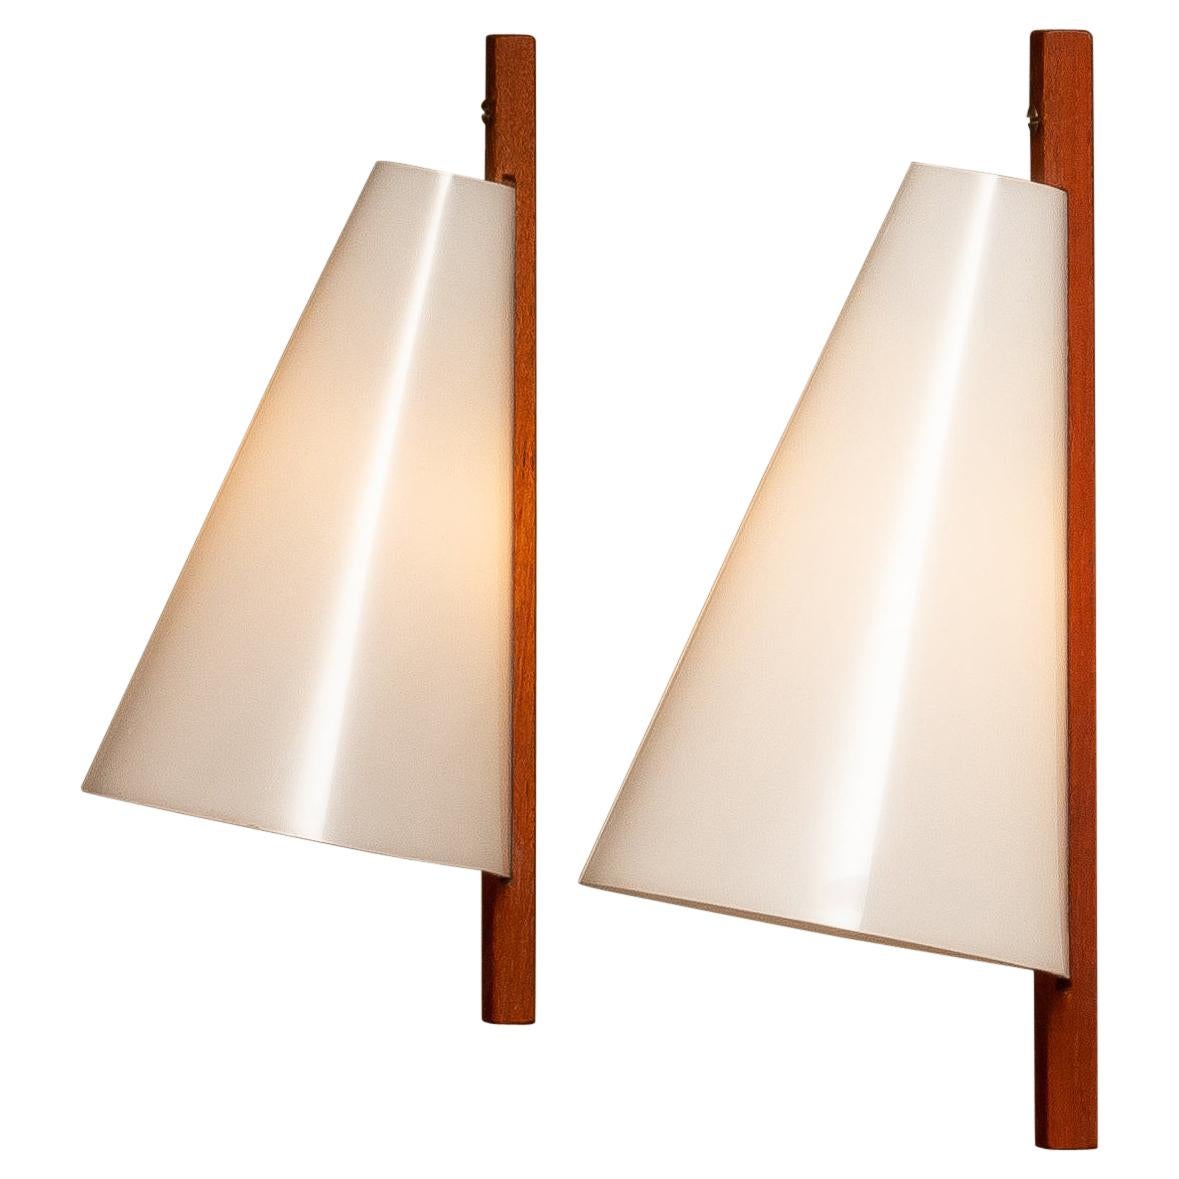 Original 1960's wall lights / scones designed by Uno & Östen Kristiansson for LUXUS, Vittsjö in Sweden. The wall lights are made of acryl plastic shade in white and a wall fixation in teak. Technically 100% and both wall lights have a screw fitting